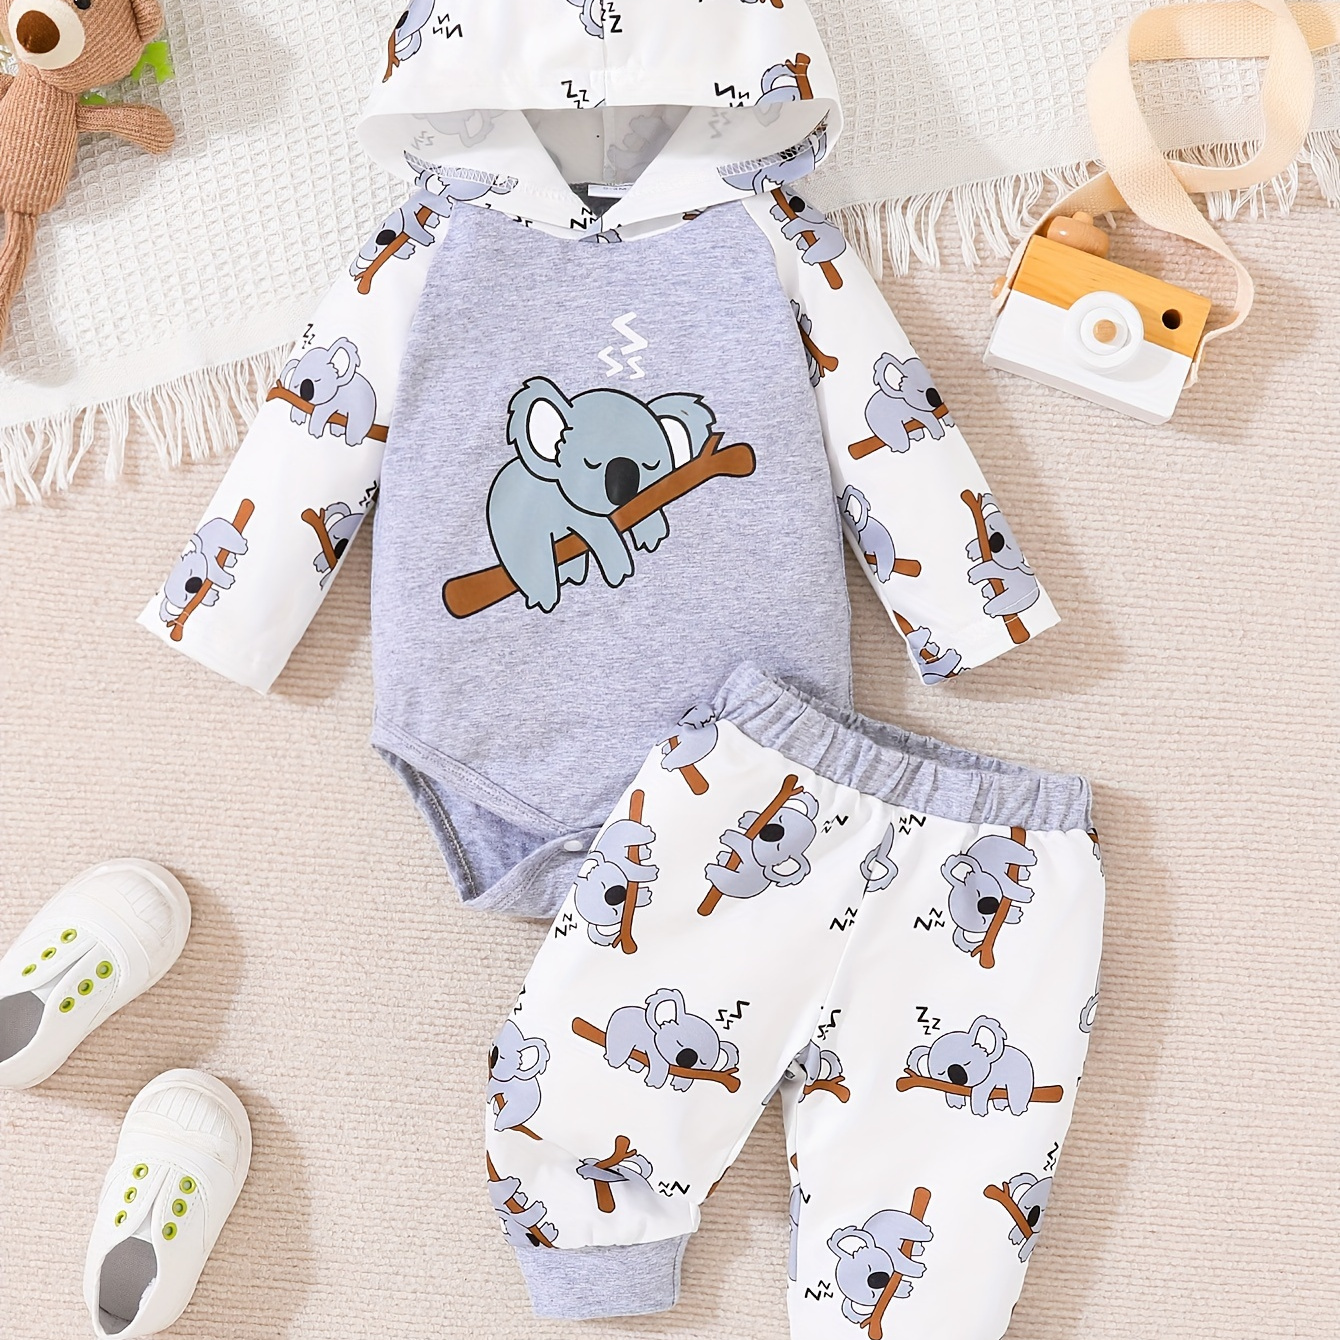 

2pcs Baby's Cartoon Koala Print Hooded Bodysuit & Comfy Full Print Pants Set, Infant & Toddler Boy's Clothes For Spring Fall Daily Wear